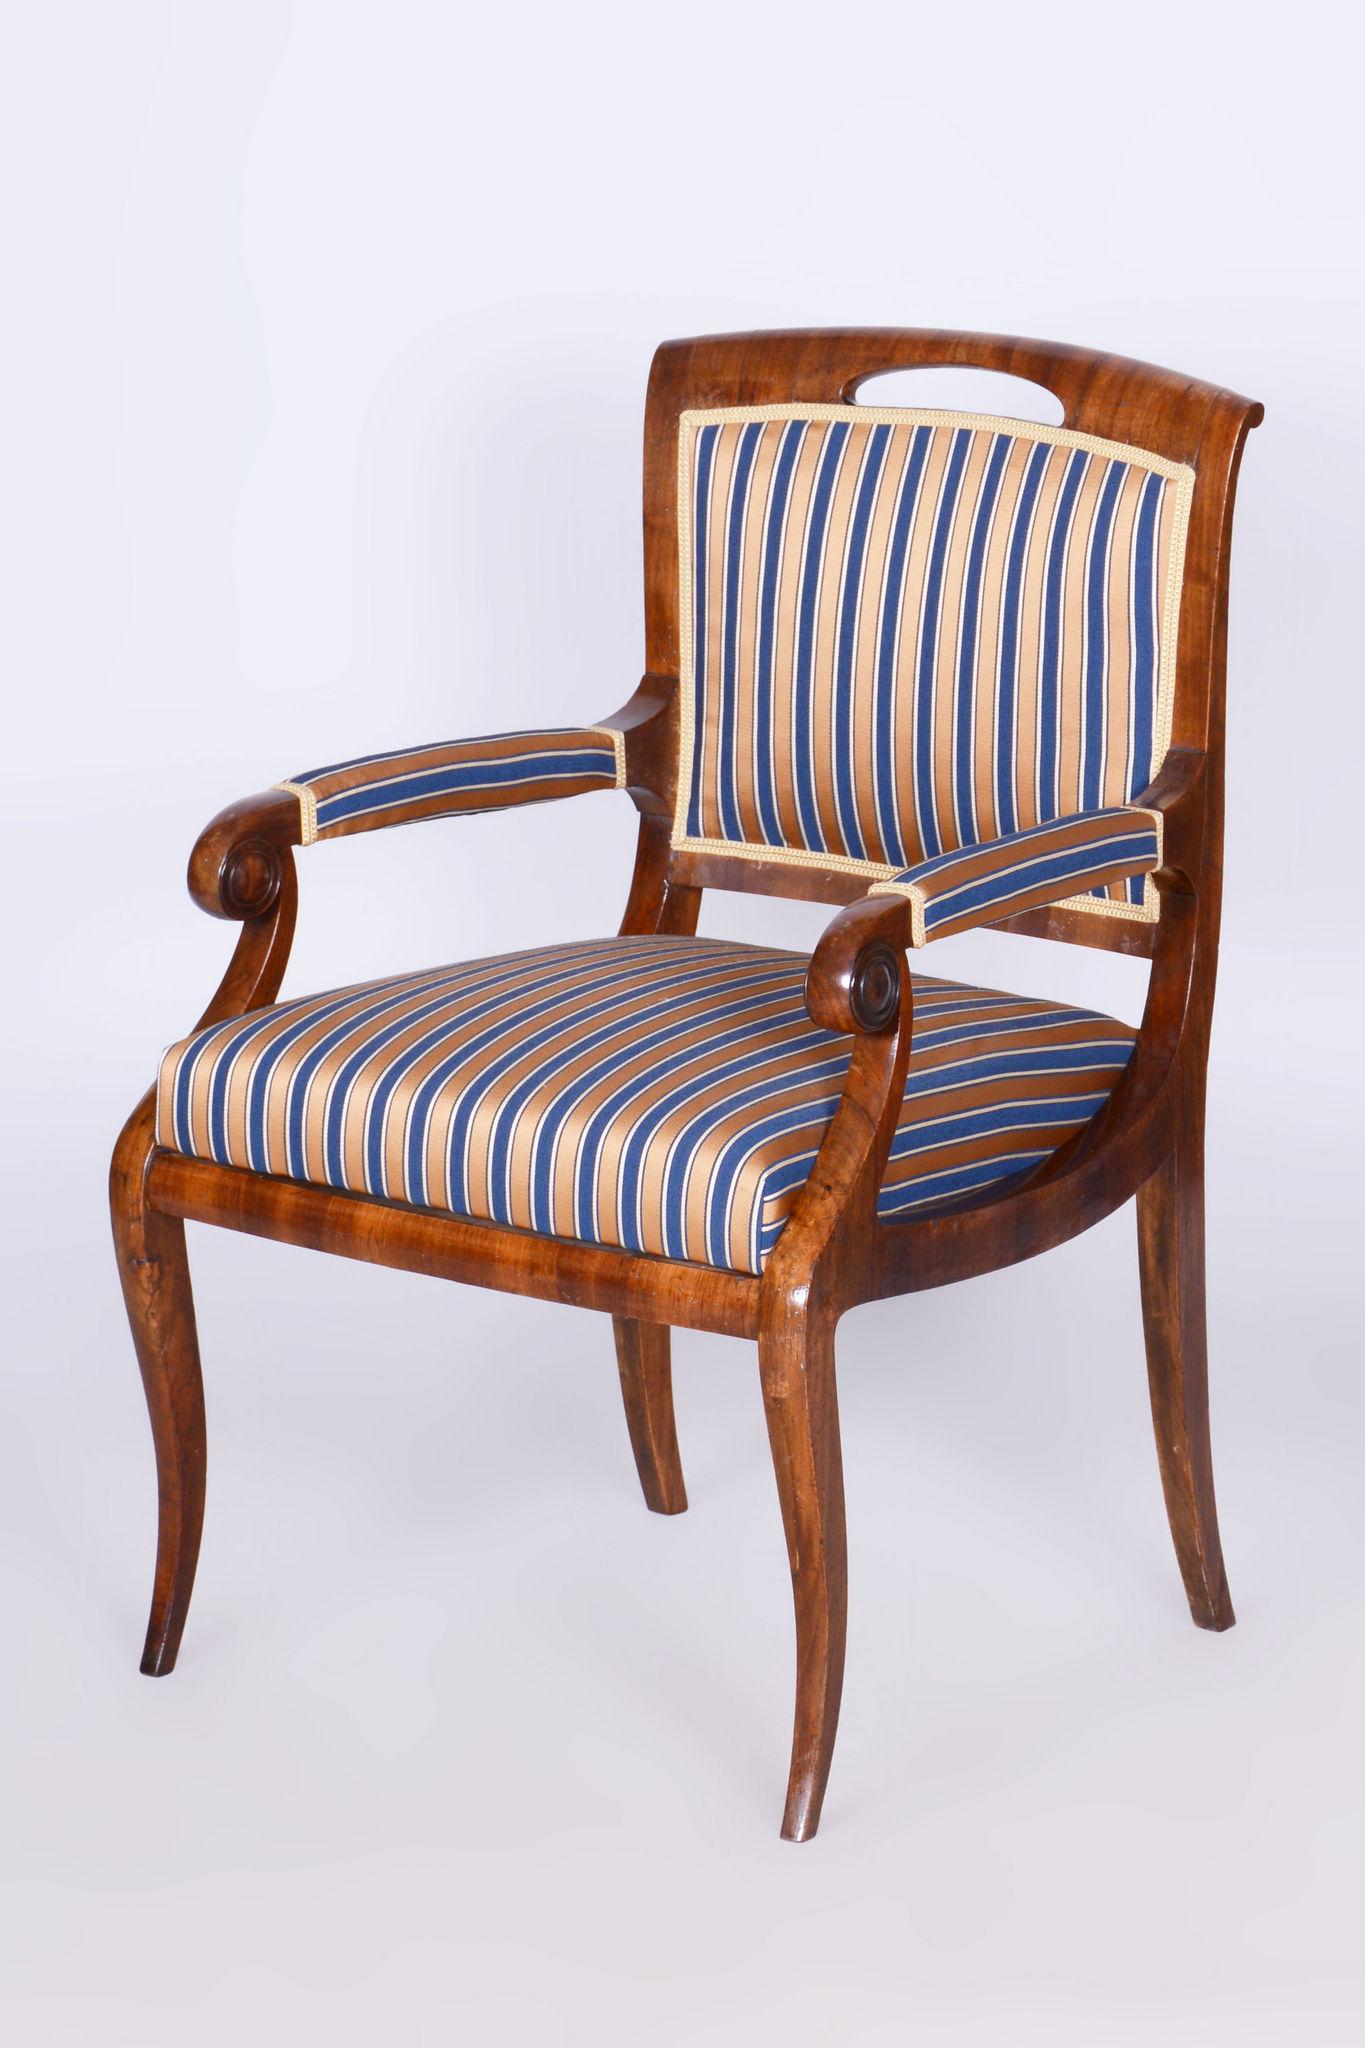 Our professional refurbishing team in Czechia has fully restored it according to the original process. 

It has been reupholstered by our professional refurbishing team in Czechia. Please contact us to find out the details of its reupholstery.

It